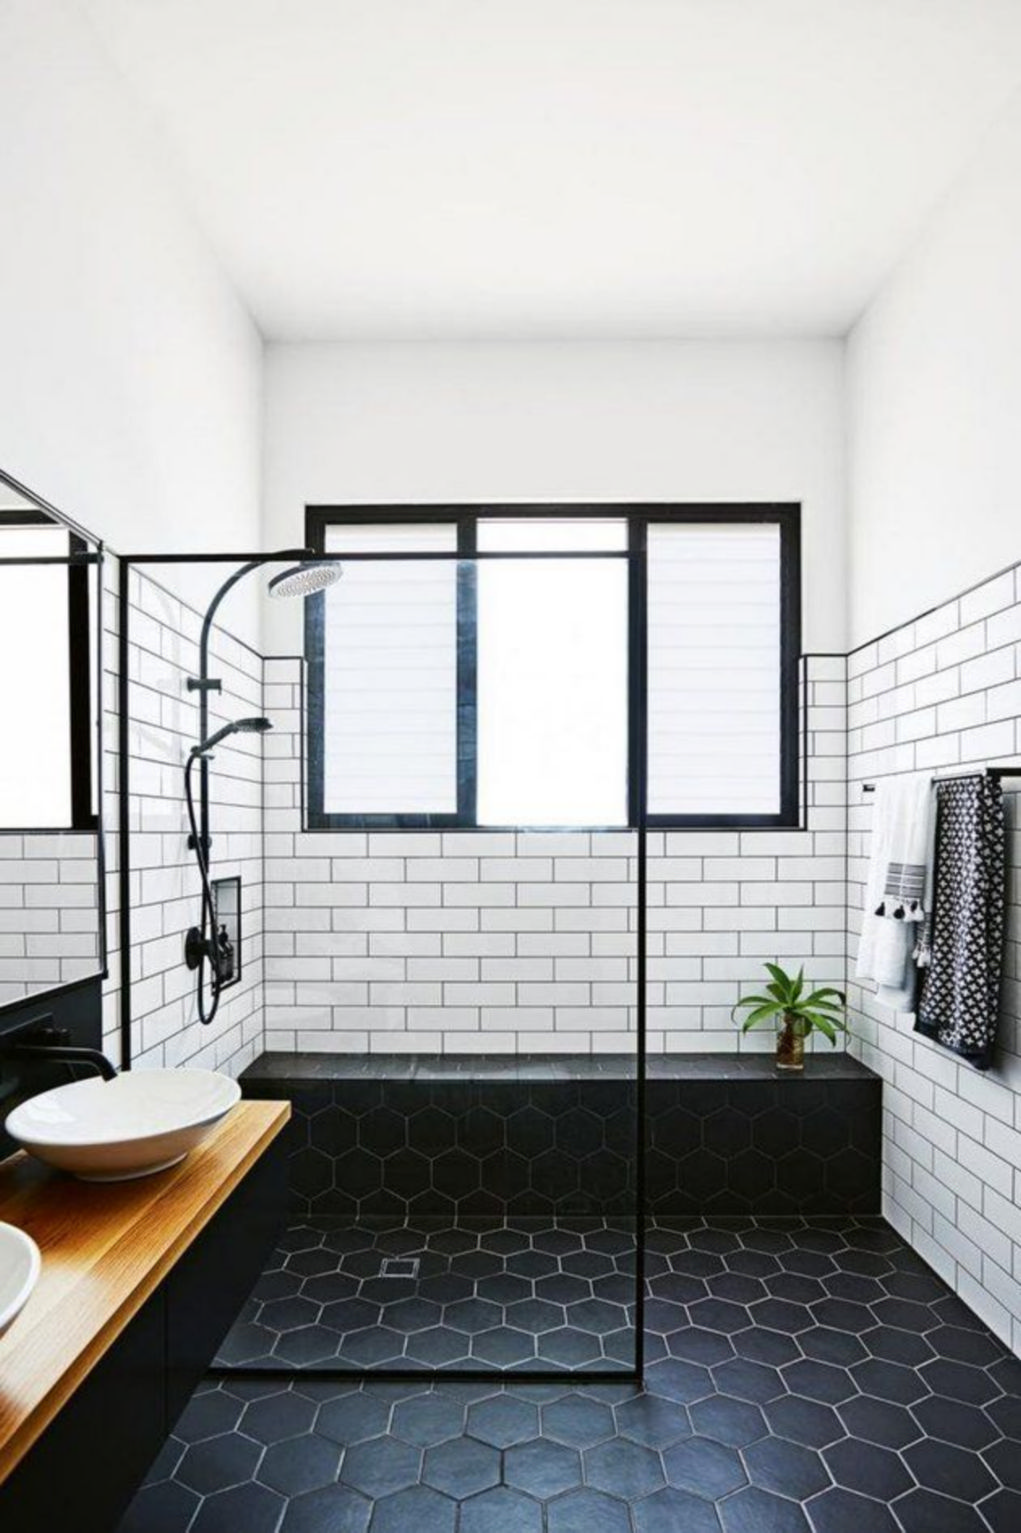 Unpredictable Bathroom Tile Design Ideas That You Can Work On To Make Your Personal 4th  to select